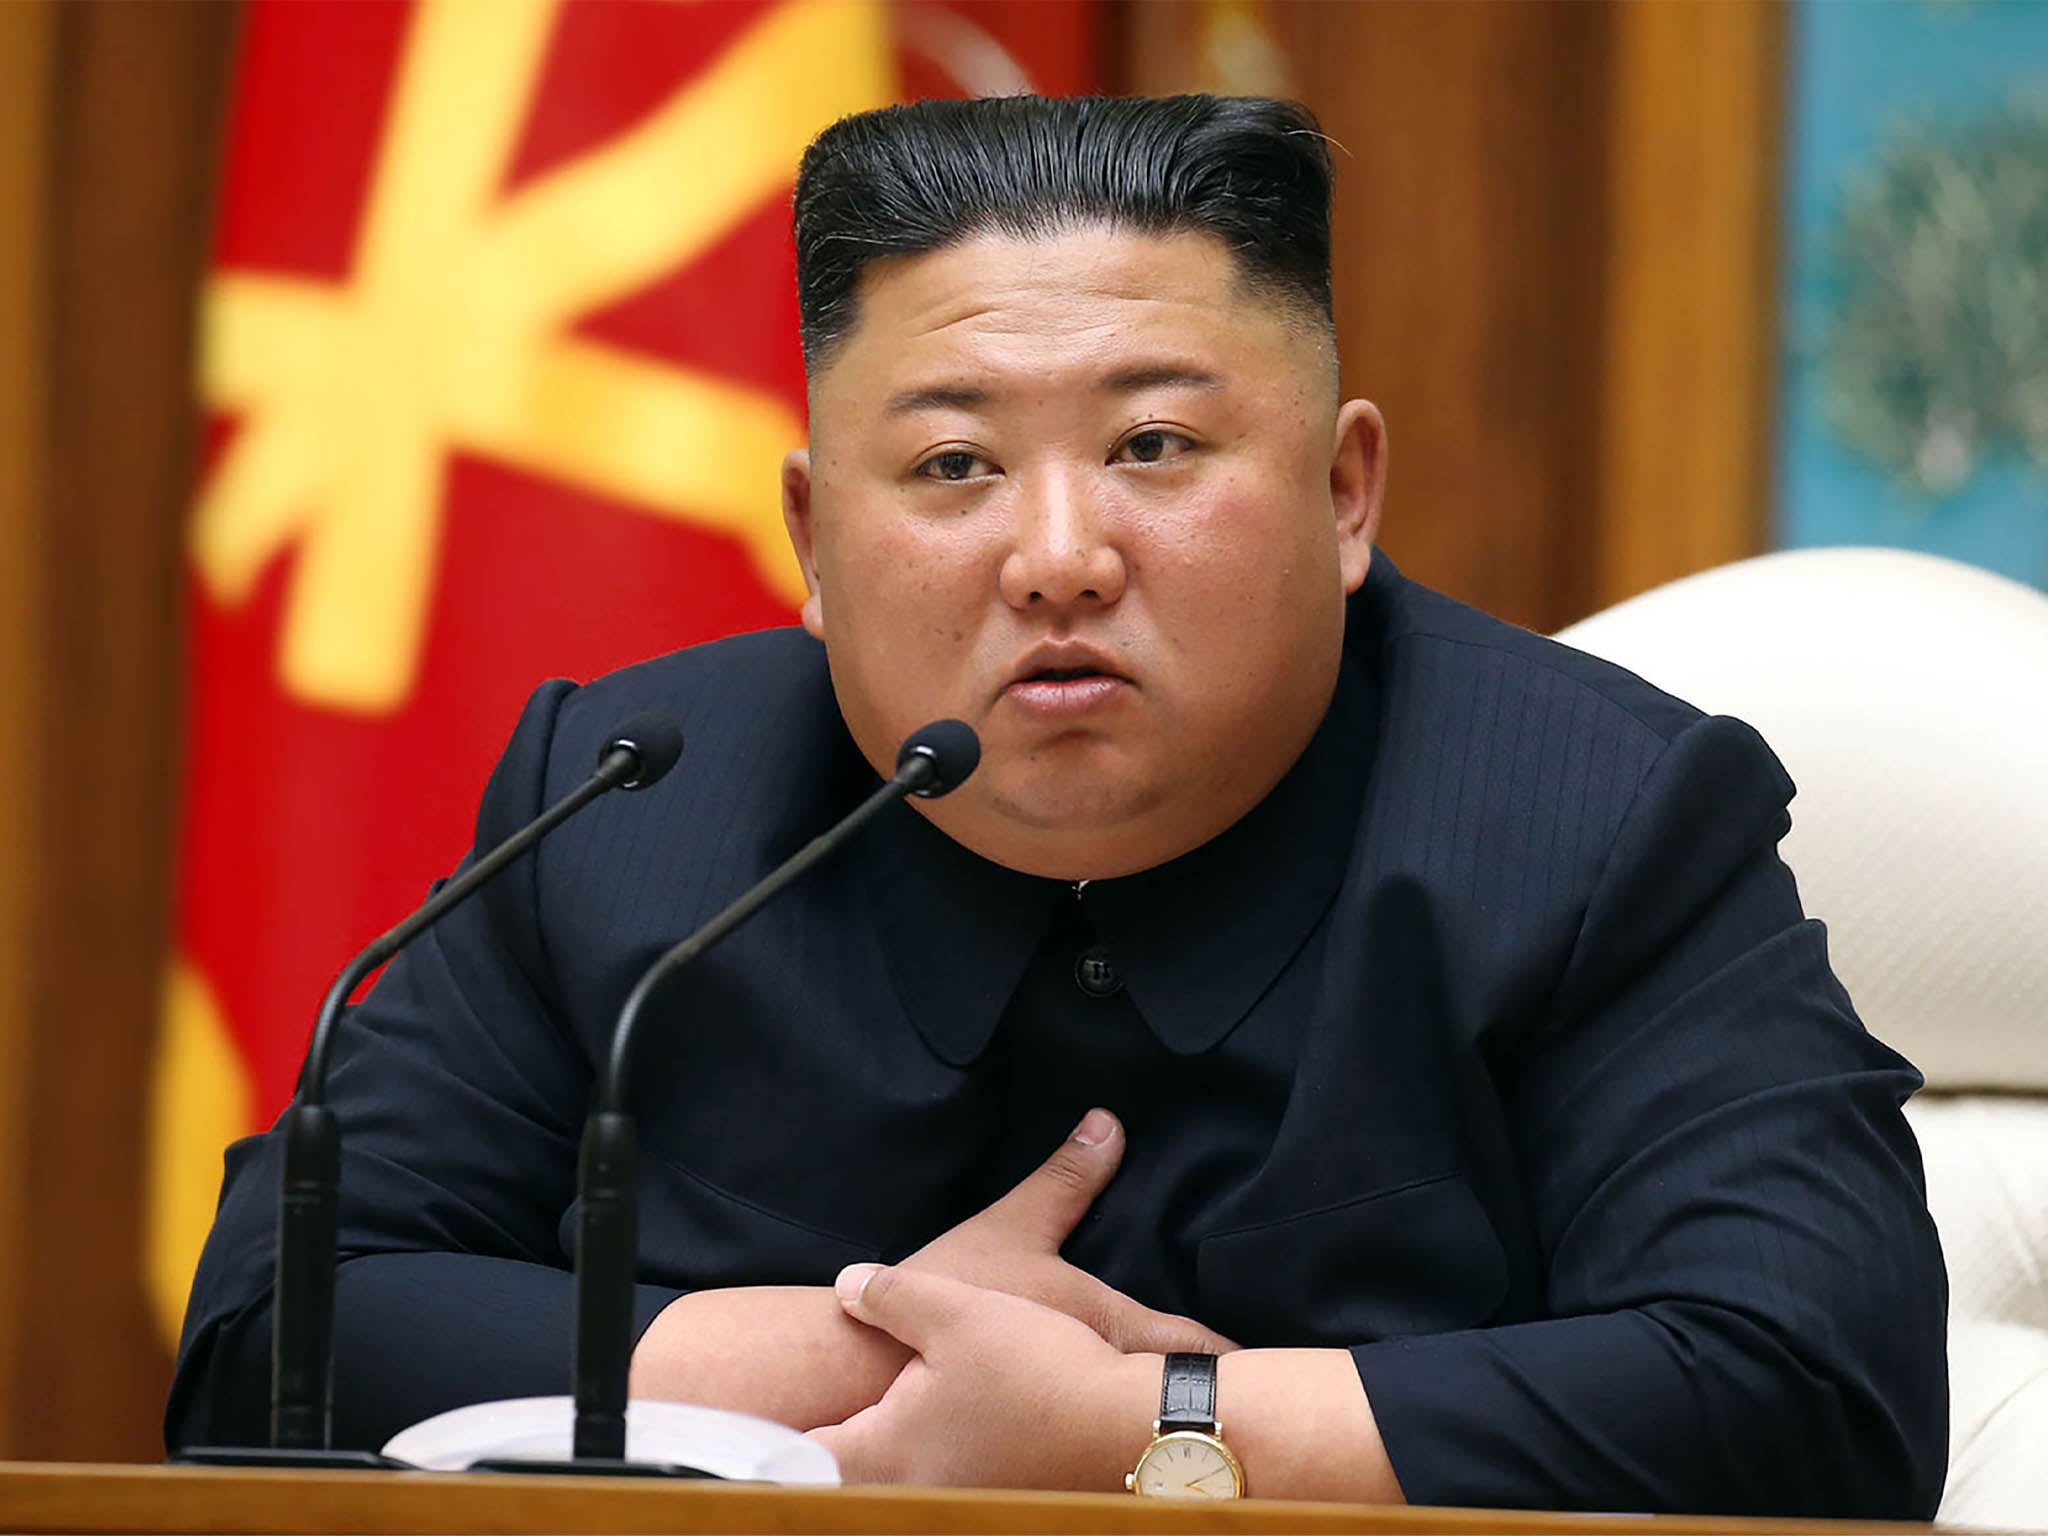 Kim Jong-un is expected to unveil a new five-year economic plan for North Korea &nbsp;